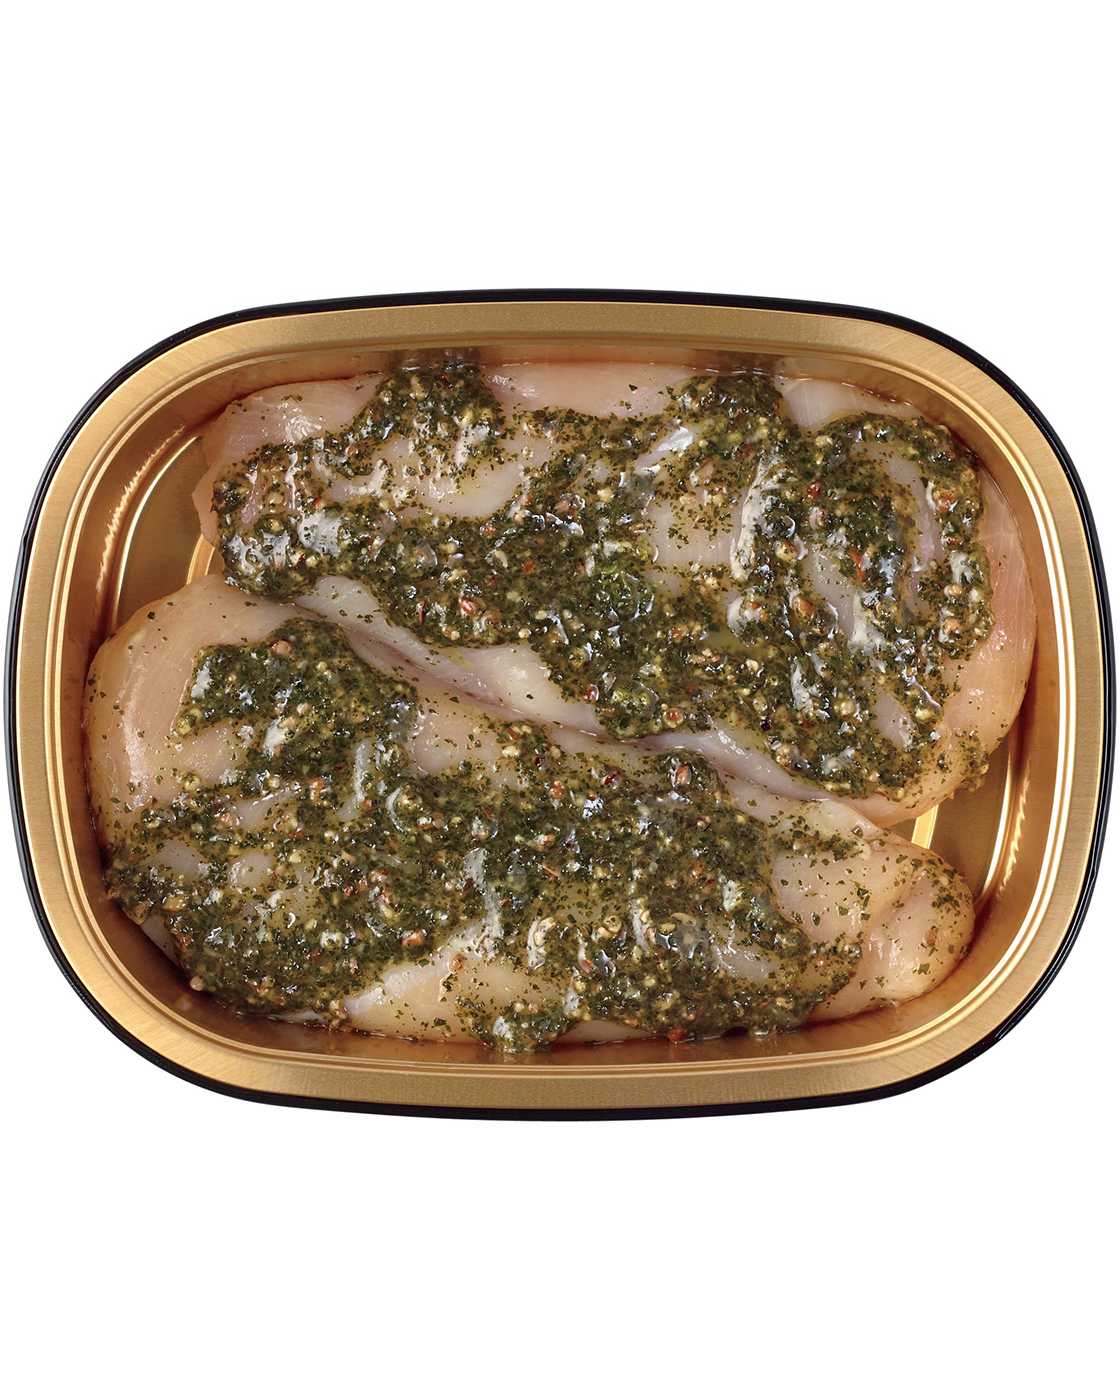 Meal Simple by H-E-B Chicken Breasts Entrée - Basil Pesto; image 1 of 3